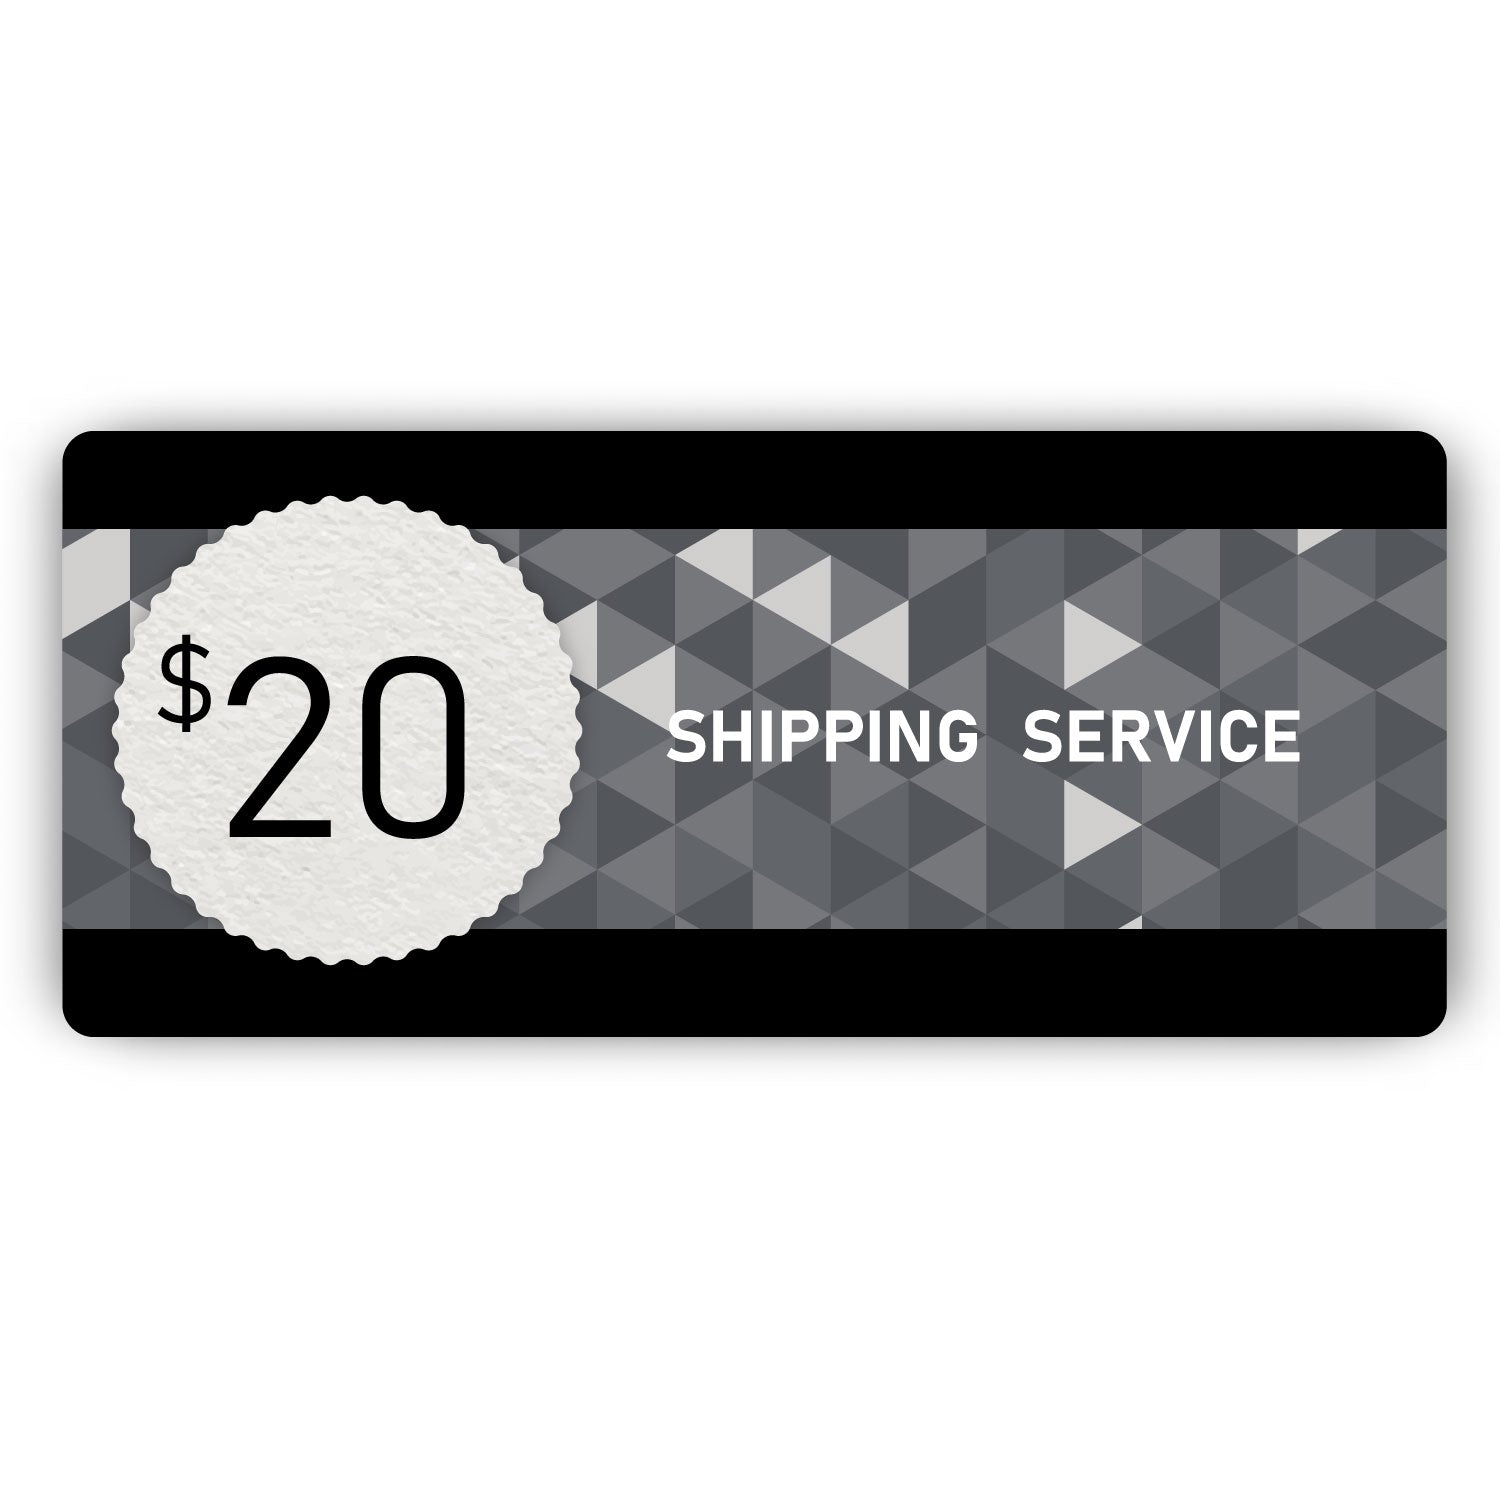 Shipping Service - $20